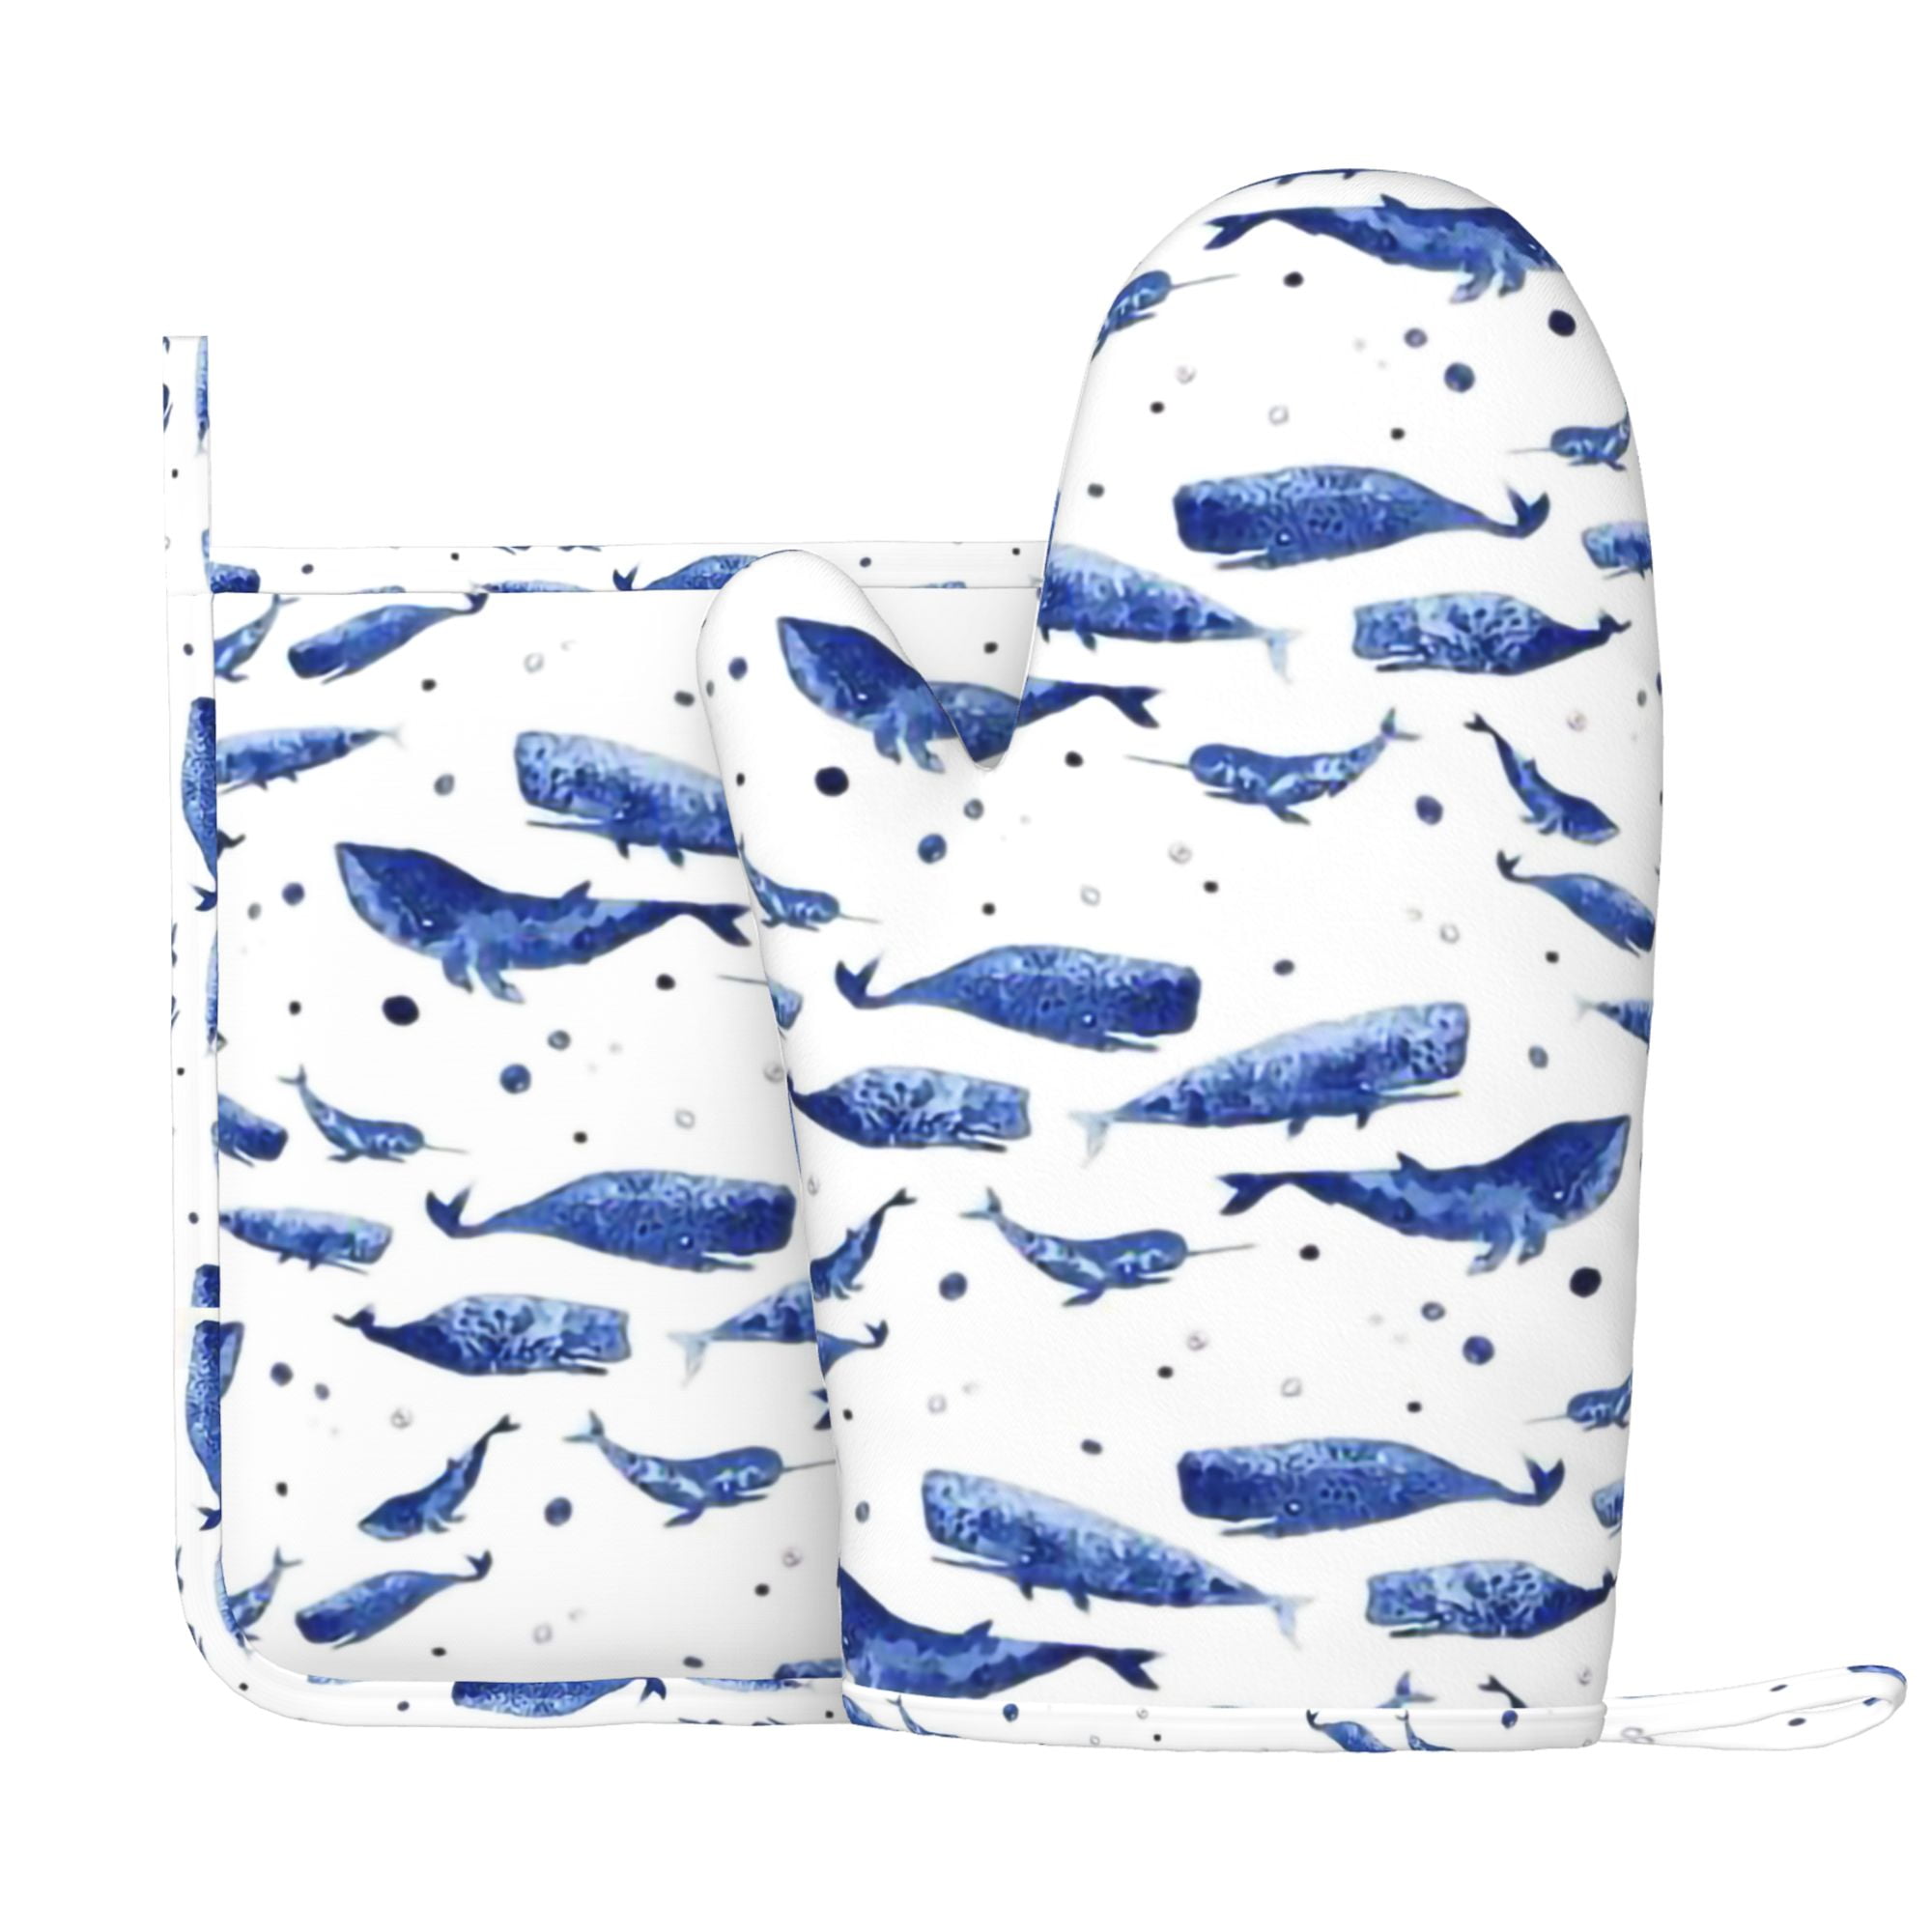 Whales Pattern Kitchen Oven Mittens Art Sea Ceatures Oven Mitt Cute Pot  Hotpads for Cooking Gift for Bakers Fish Pattern Oven Gloves ZZ8239 